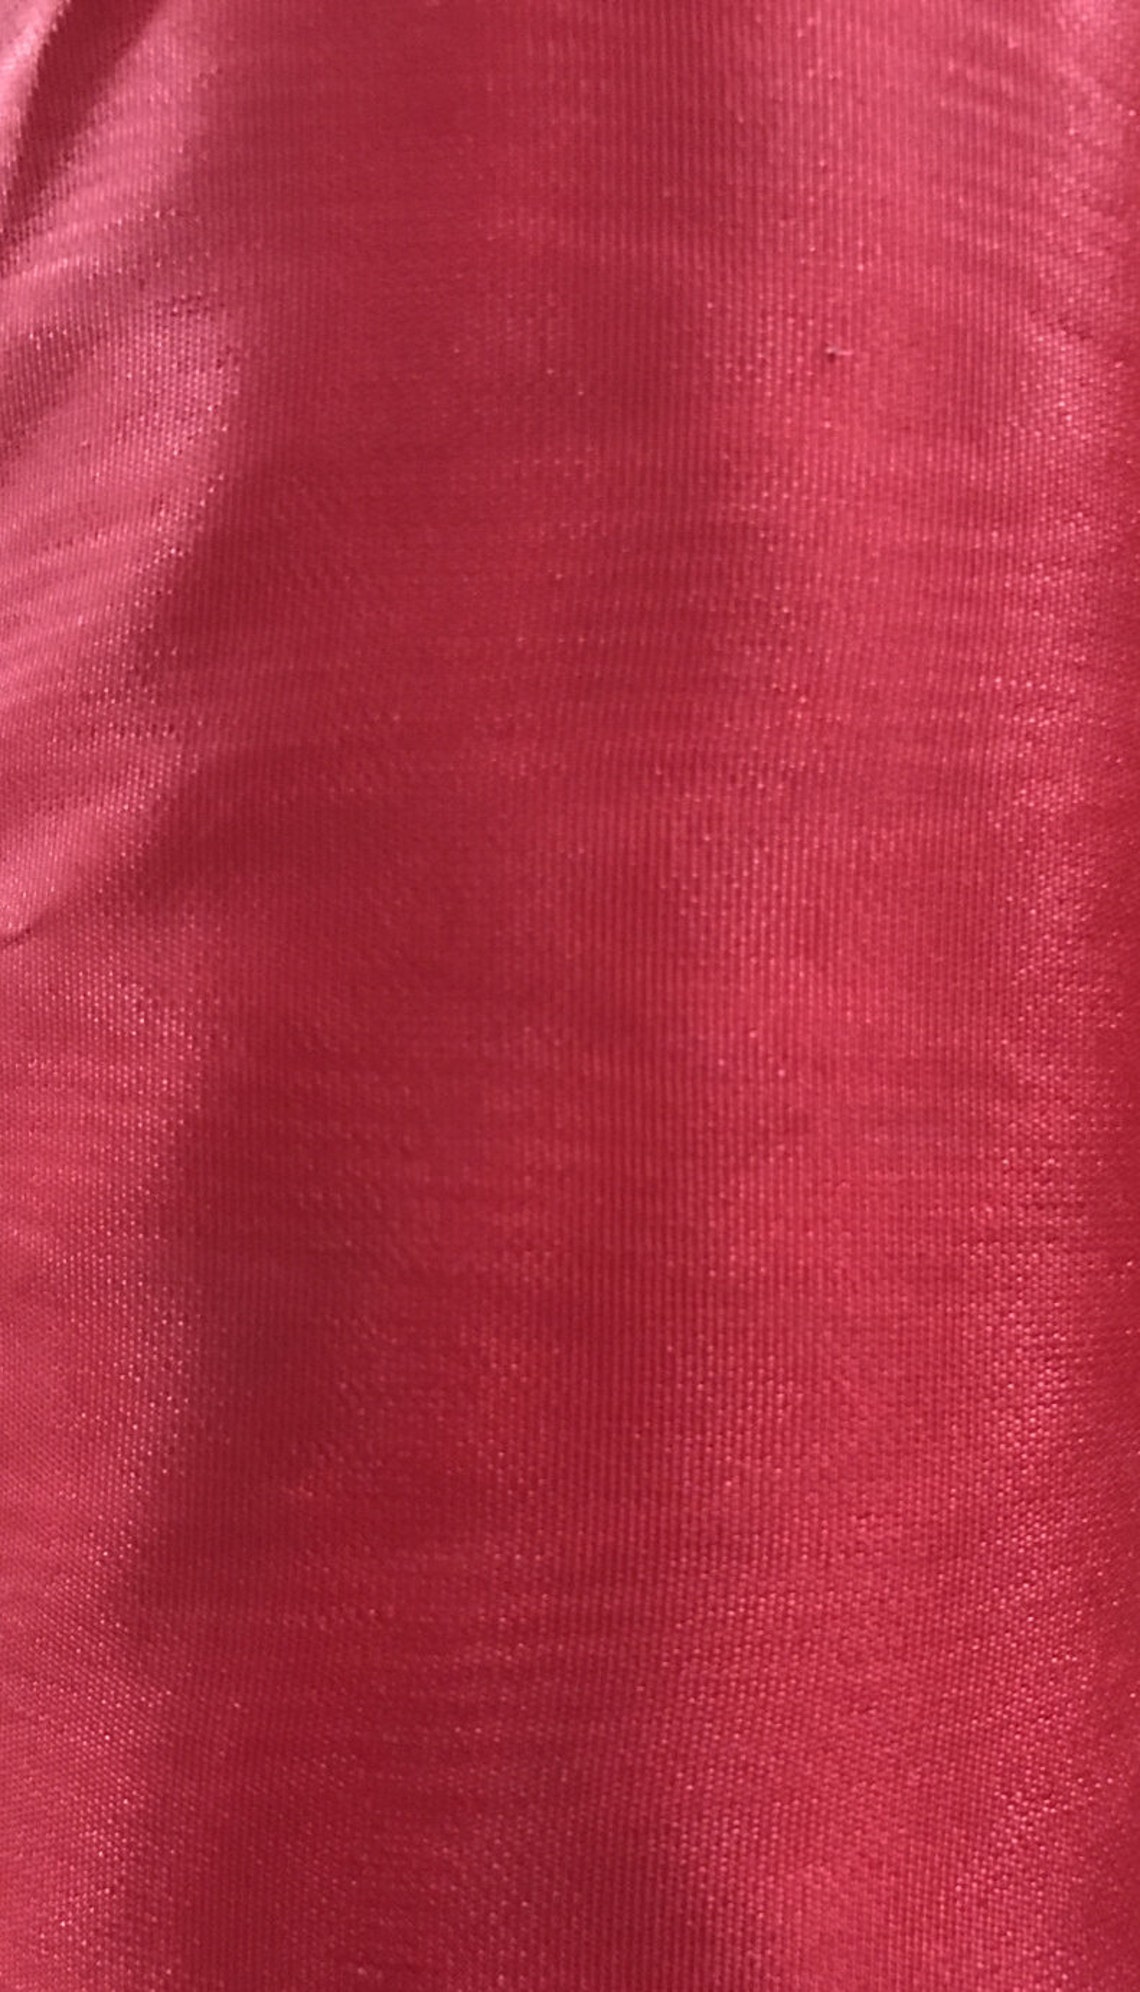 Vintage Red Moire Fabric 1/2 Yard or 1 Yard by 5 FT Vintage | Etsy